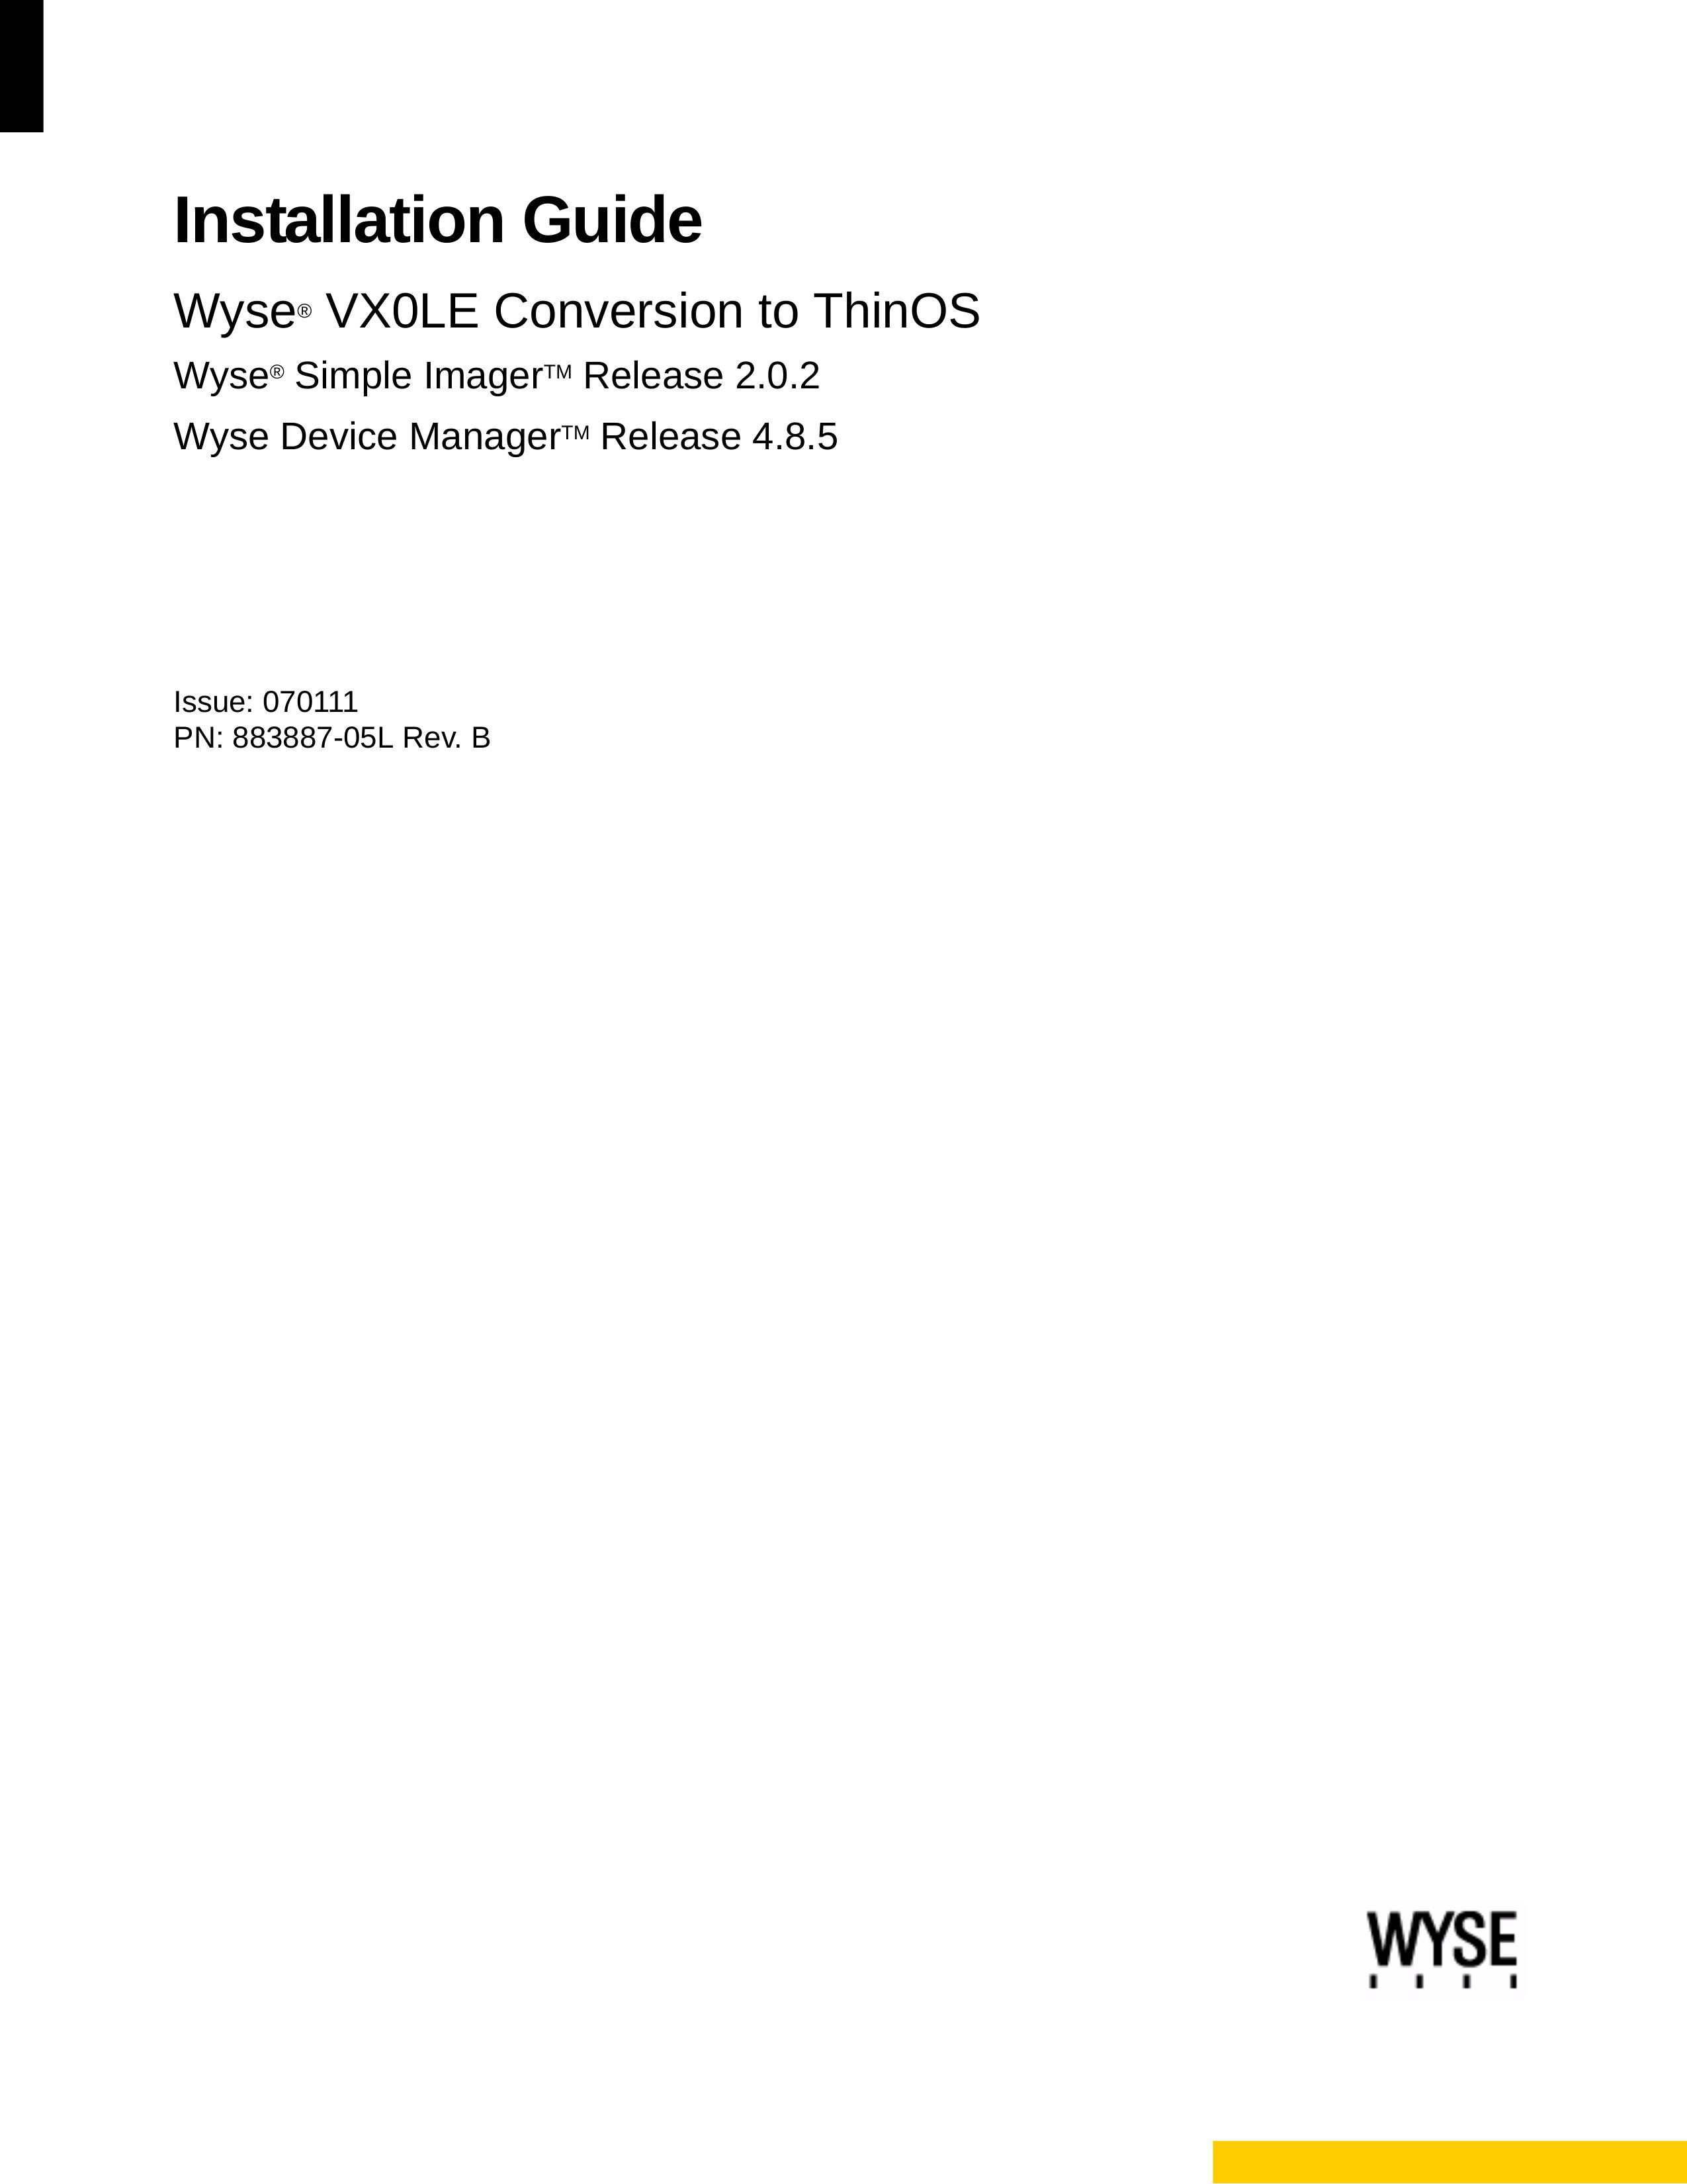 Wyse Technology wyse vx0le conversion to thinos Oxygen Equipment User Manual